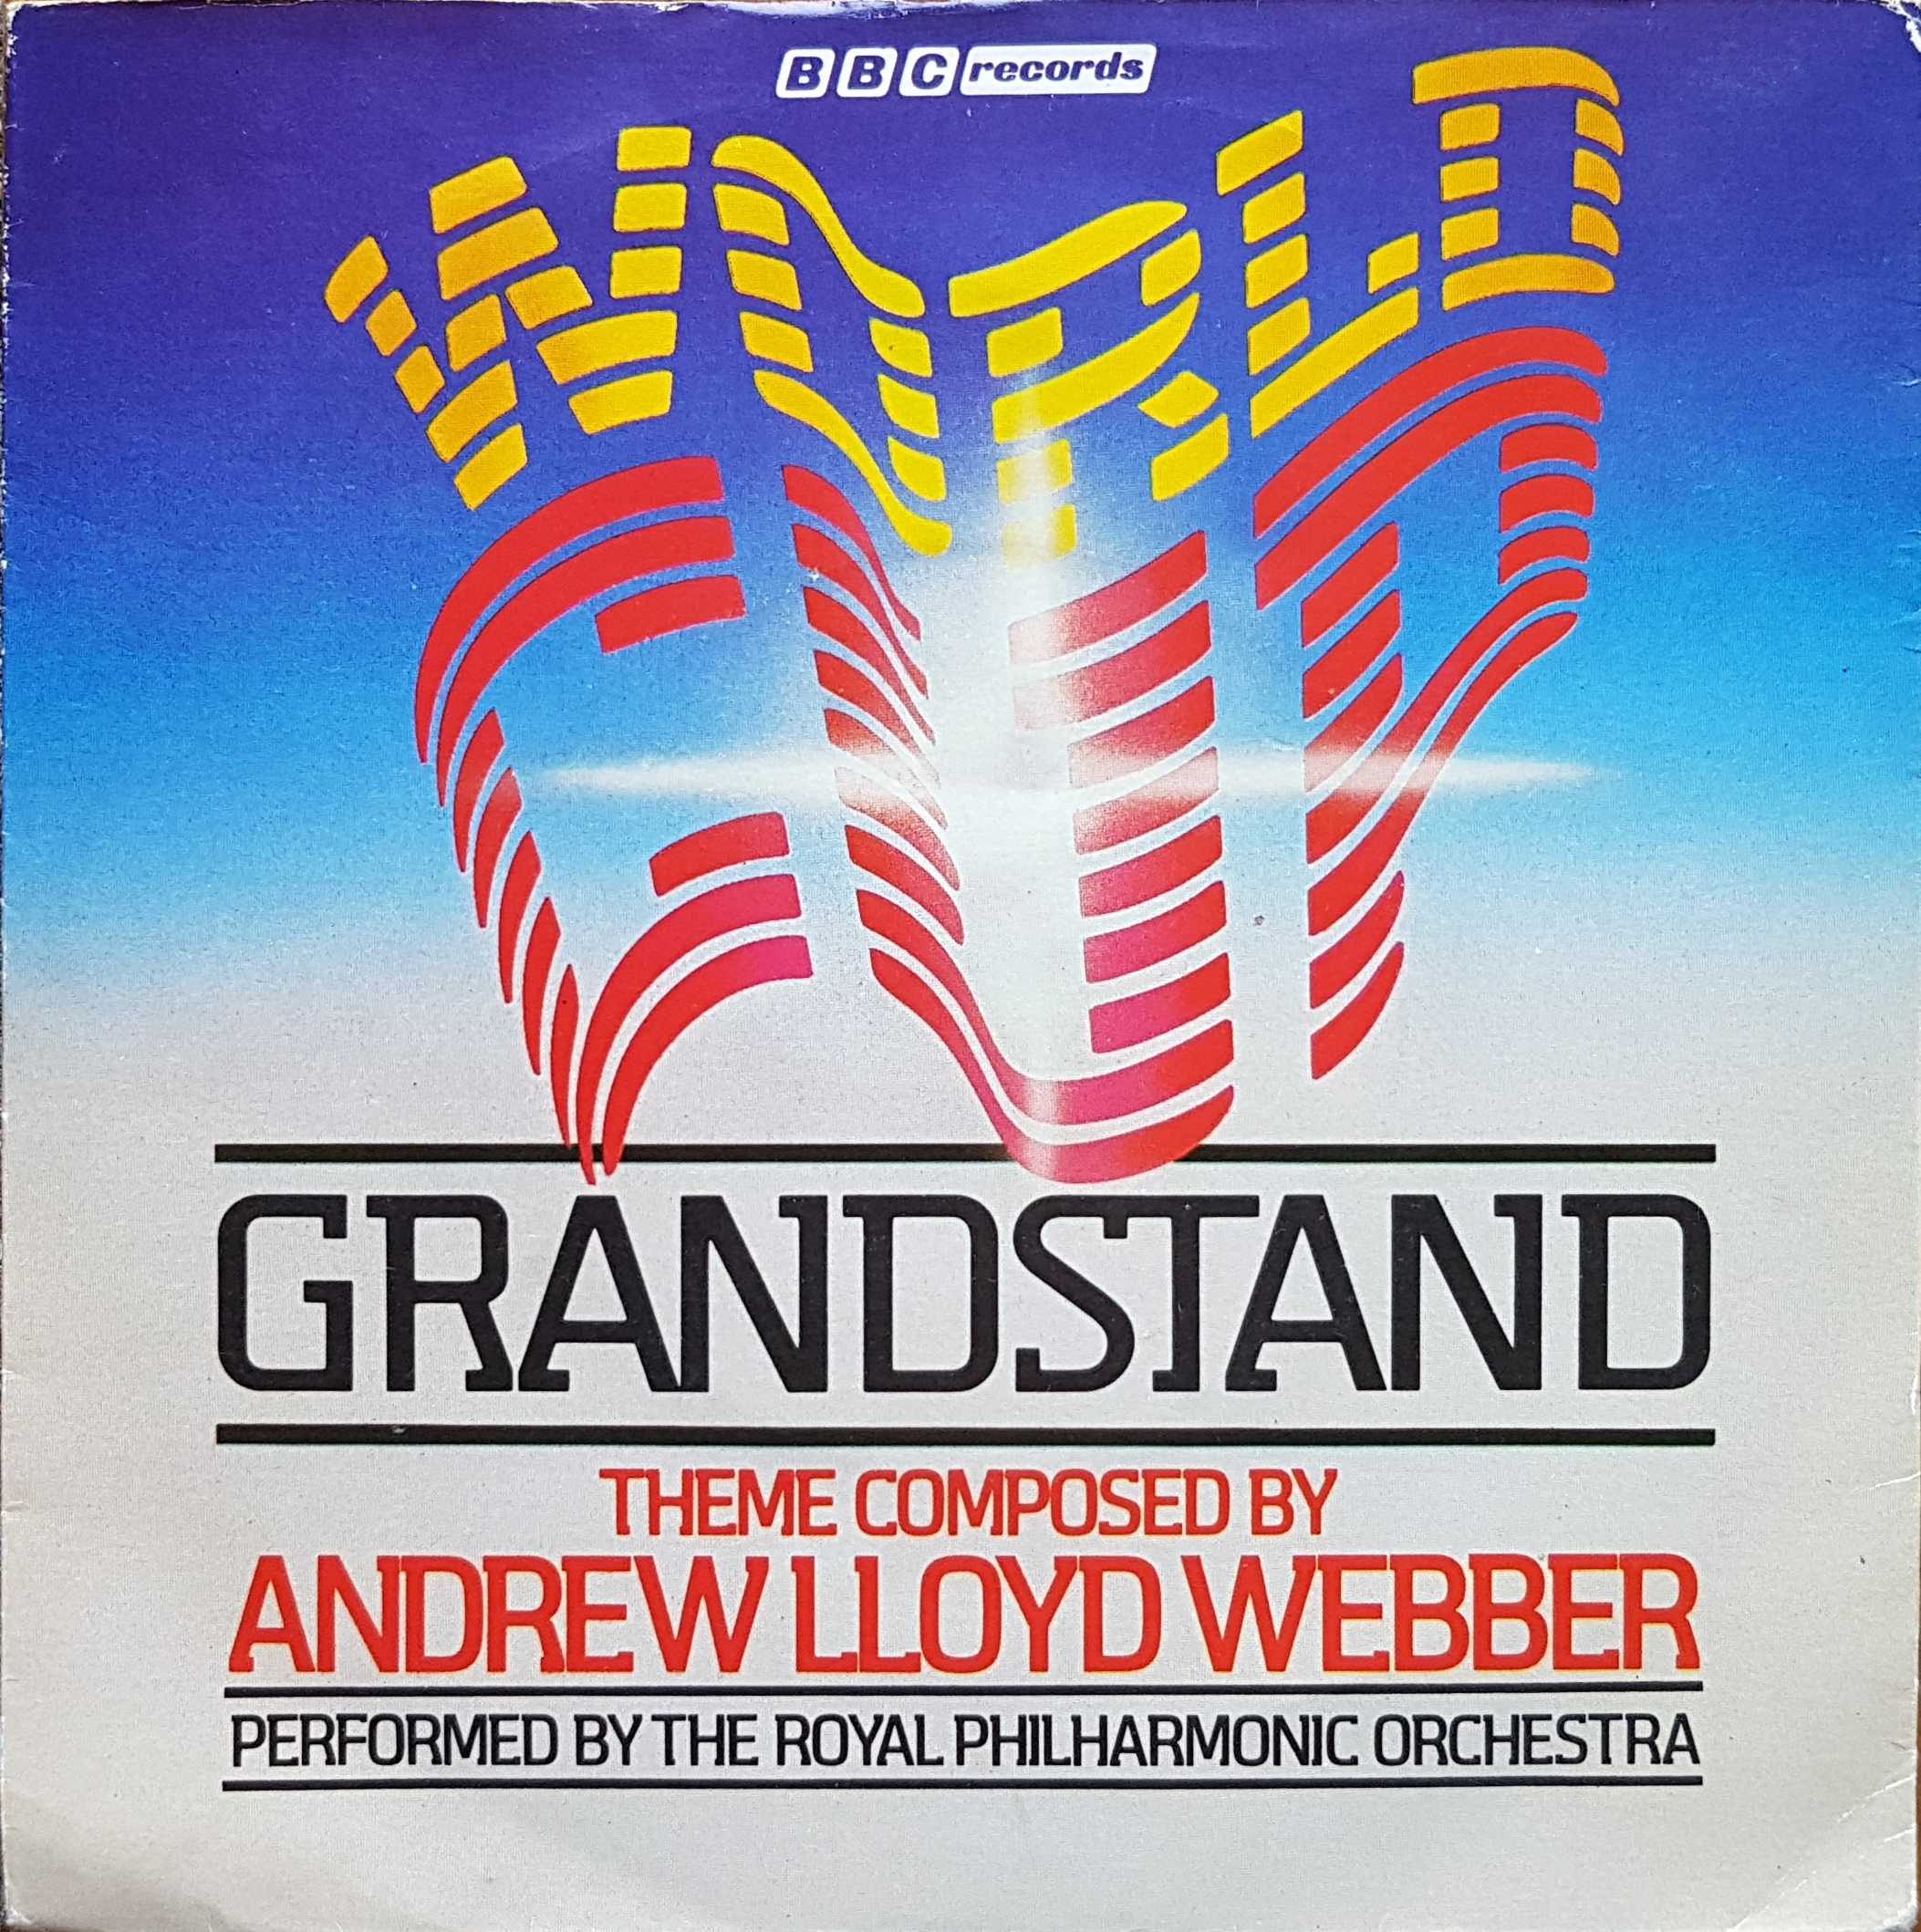 Picture of RESL 116 BBC World Cup Grandstand (1982) by artist Andrew Lloyd Webber from the BBC records and Tapes library